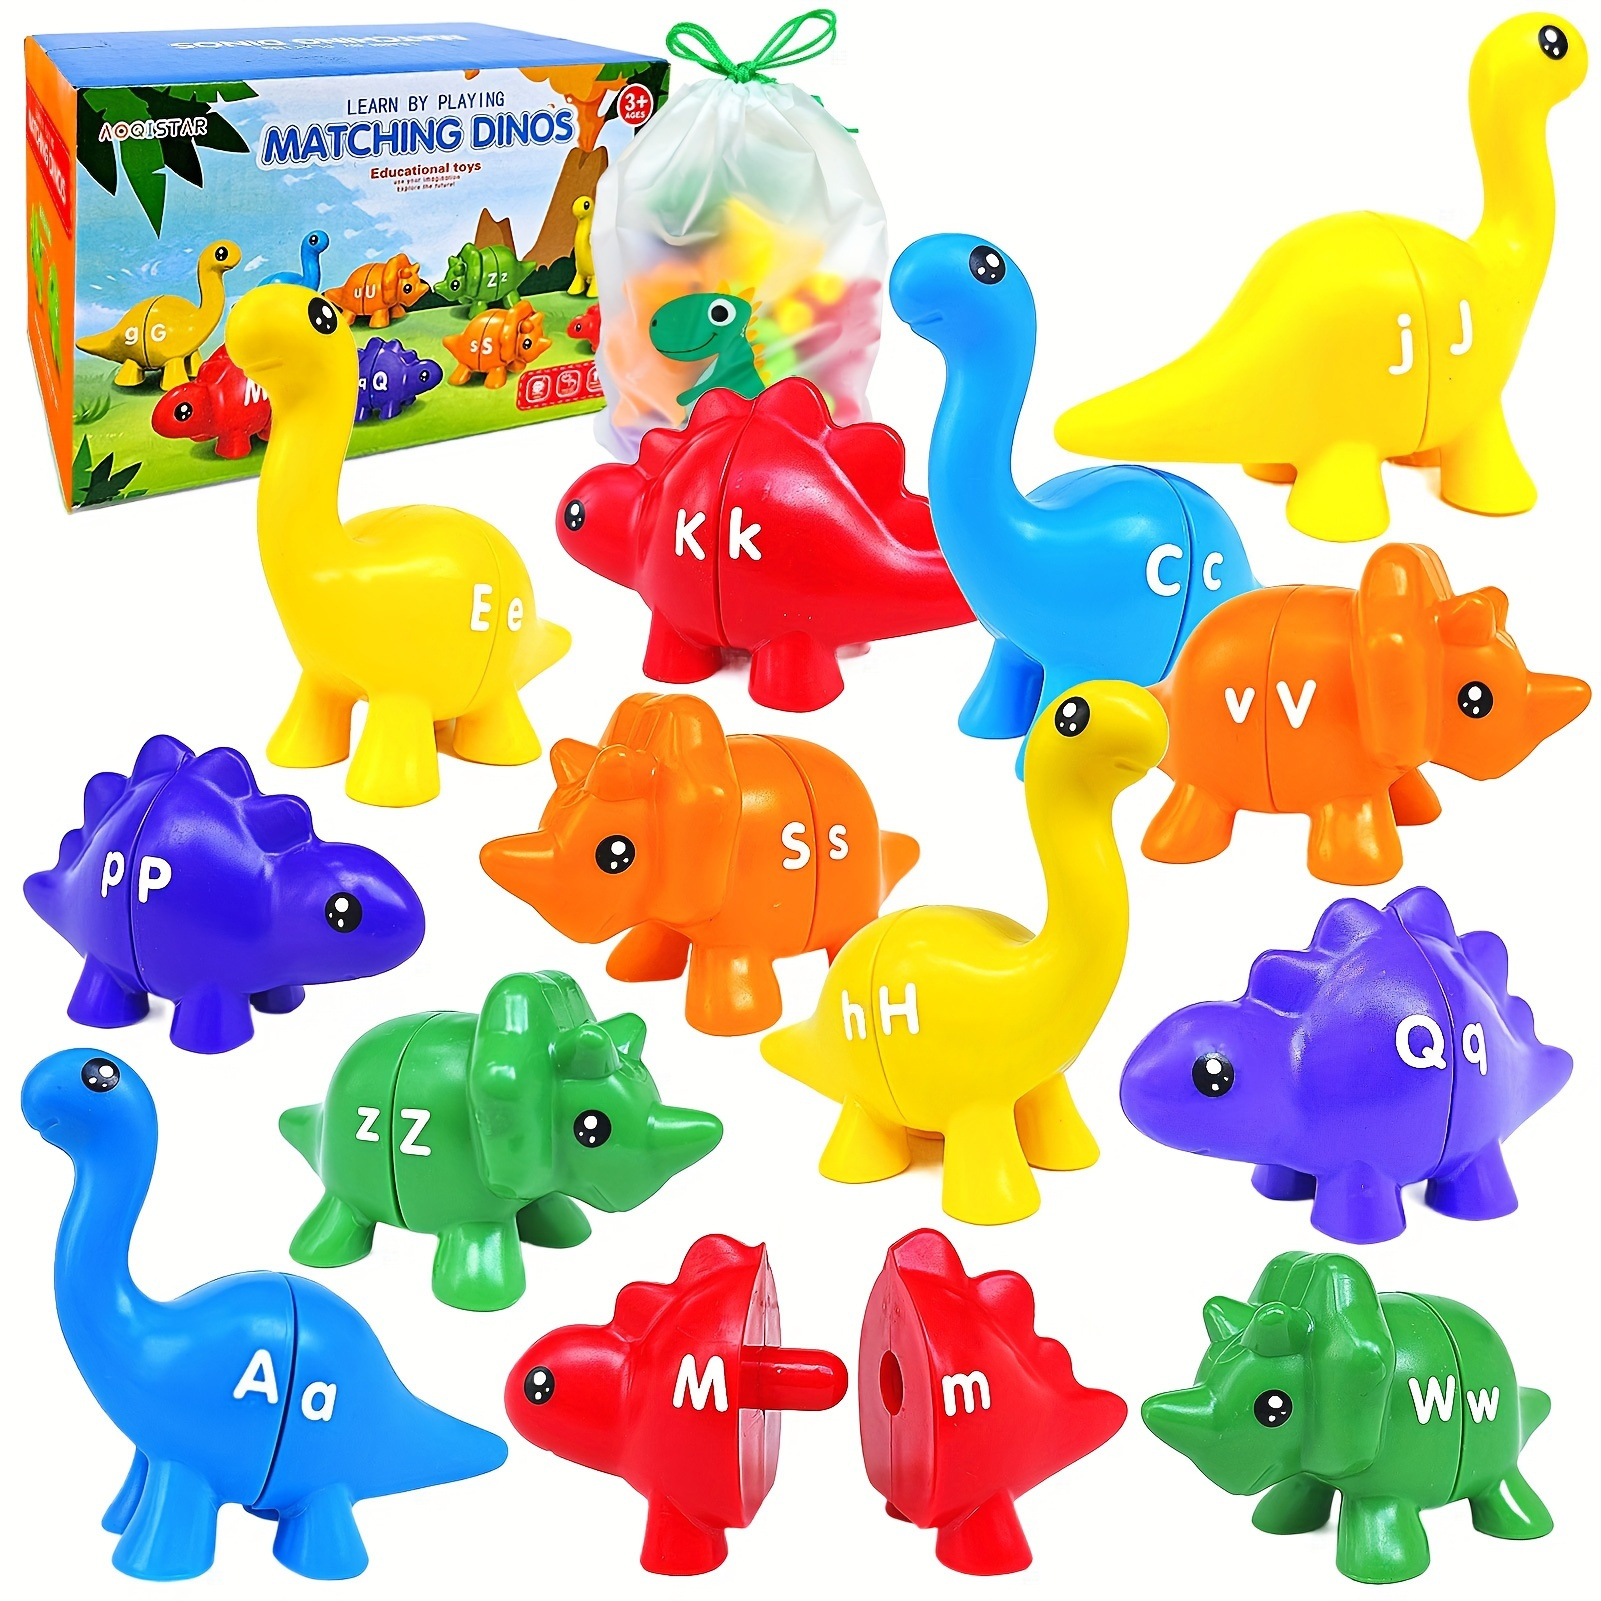 

Mypre Dinosaur Matching Game, Alphabet & Numbers 1-10, Plastic, Montessori Educational Toy For Boys & Girls Ages 0-6, Counting & Sorting, Sensory Trash Can Playset